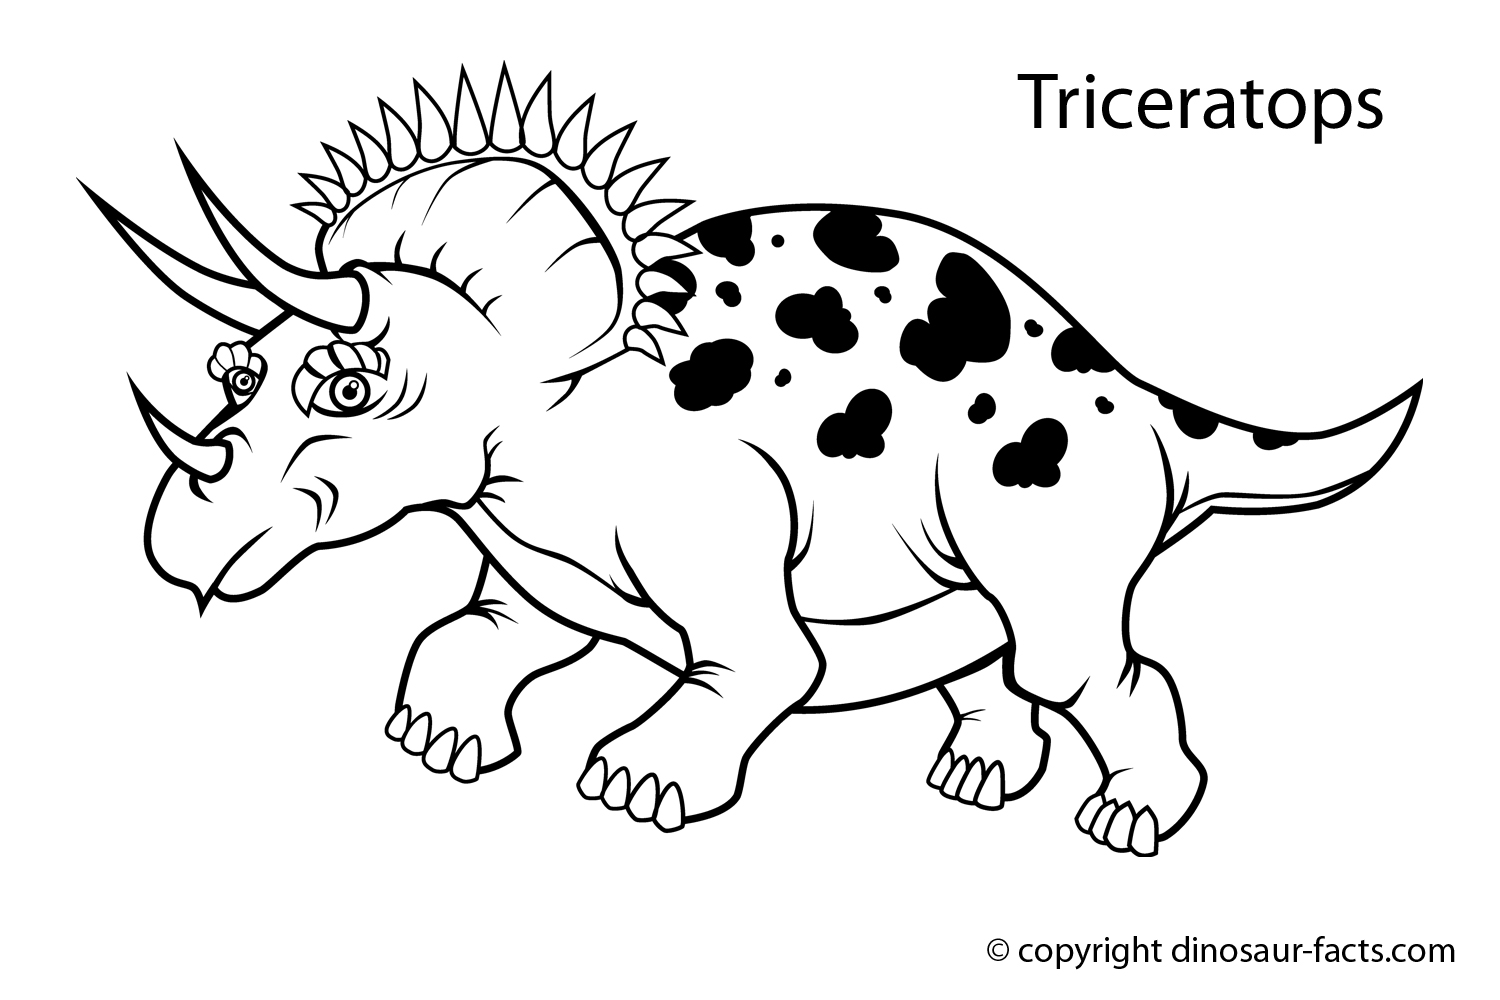  Triceraptops Dinosaur Coloring Pages  | Coloring pages for Boys